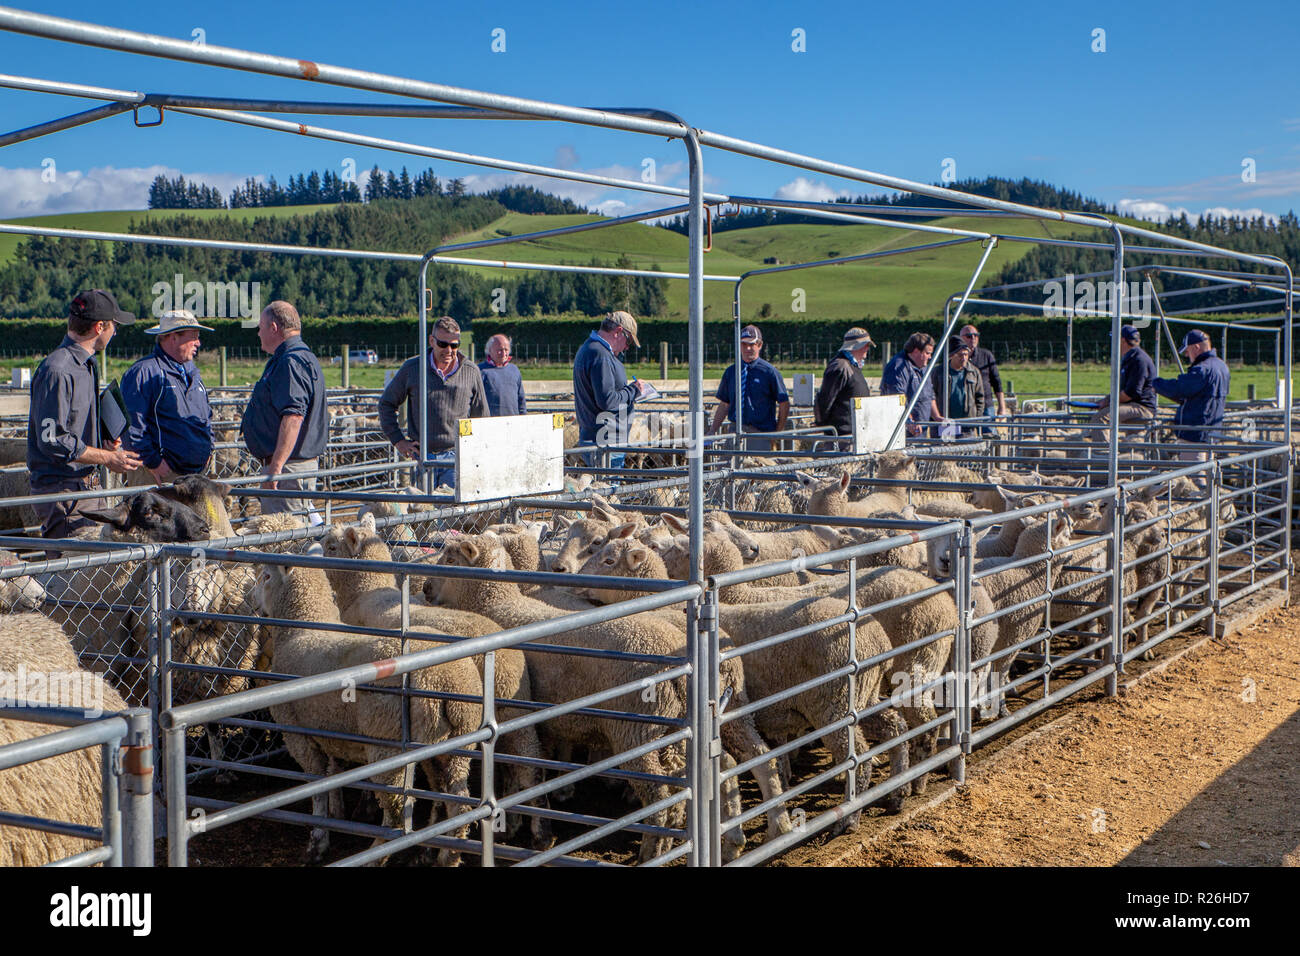 Coalgate, Canterbury, New Zealand - September 27 2018: Agents and farmers move along the pens of sheep as they are being auctioned on a spring morning Stock Photo